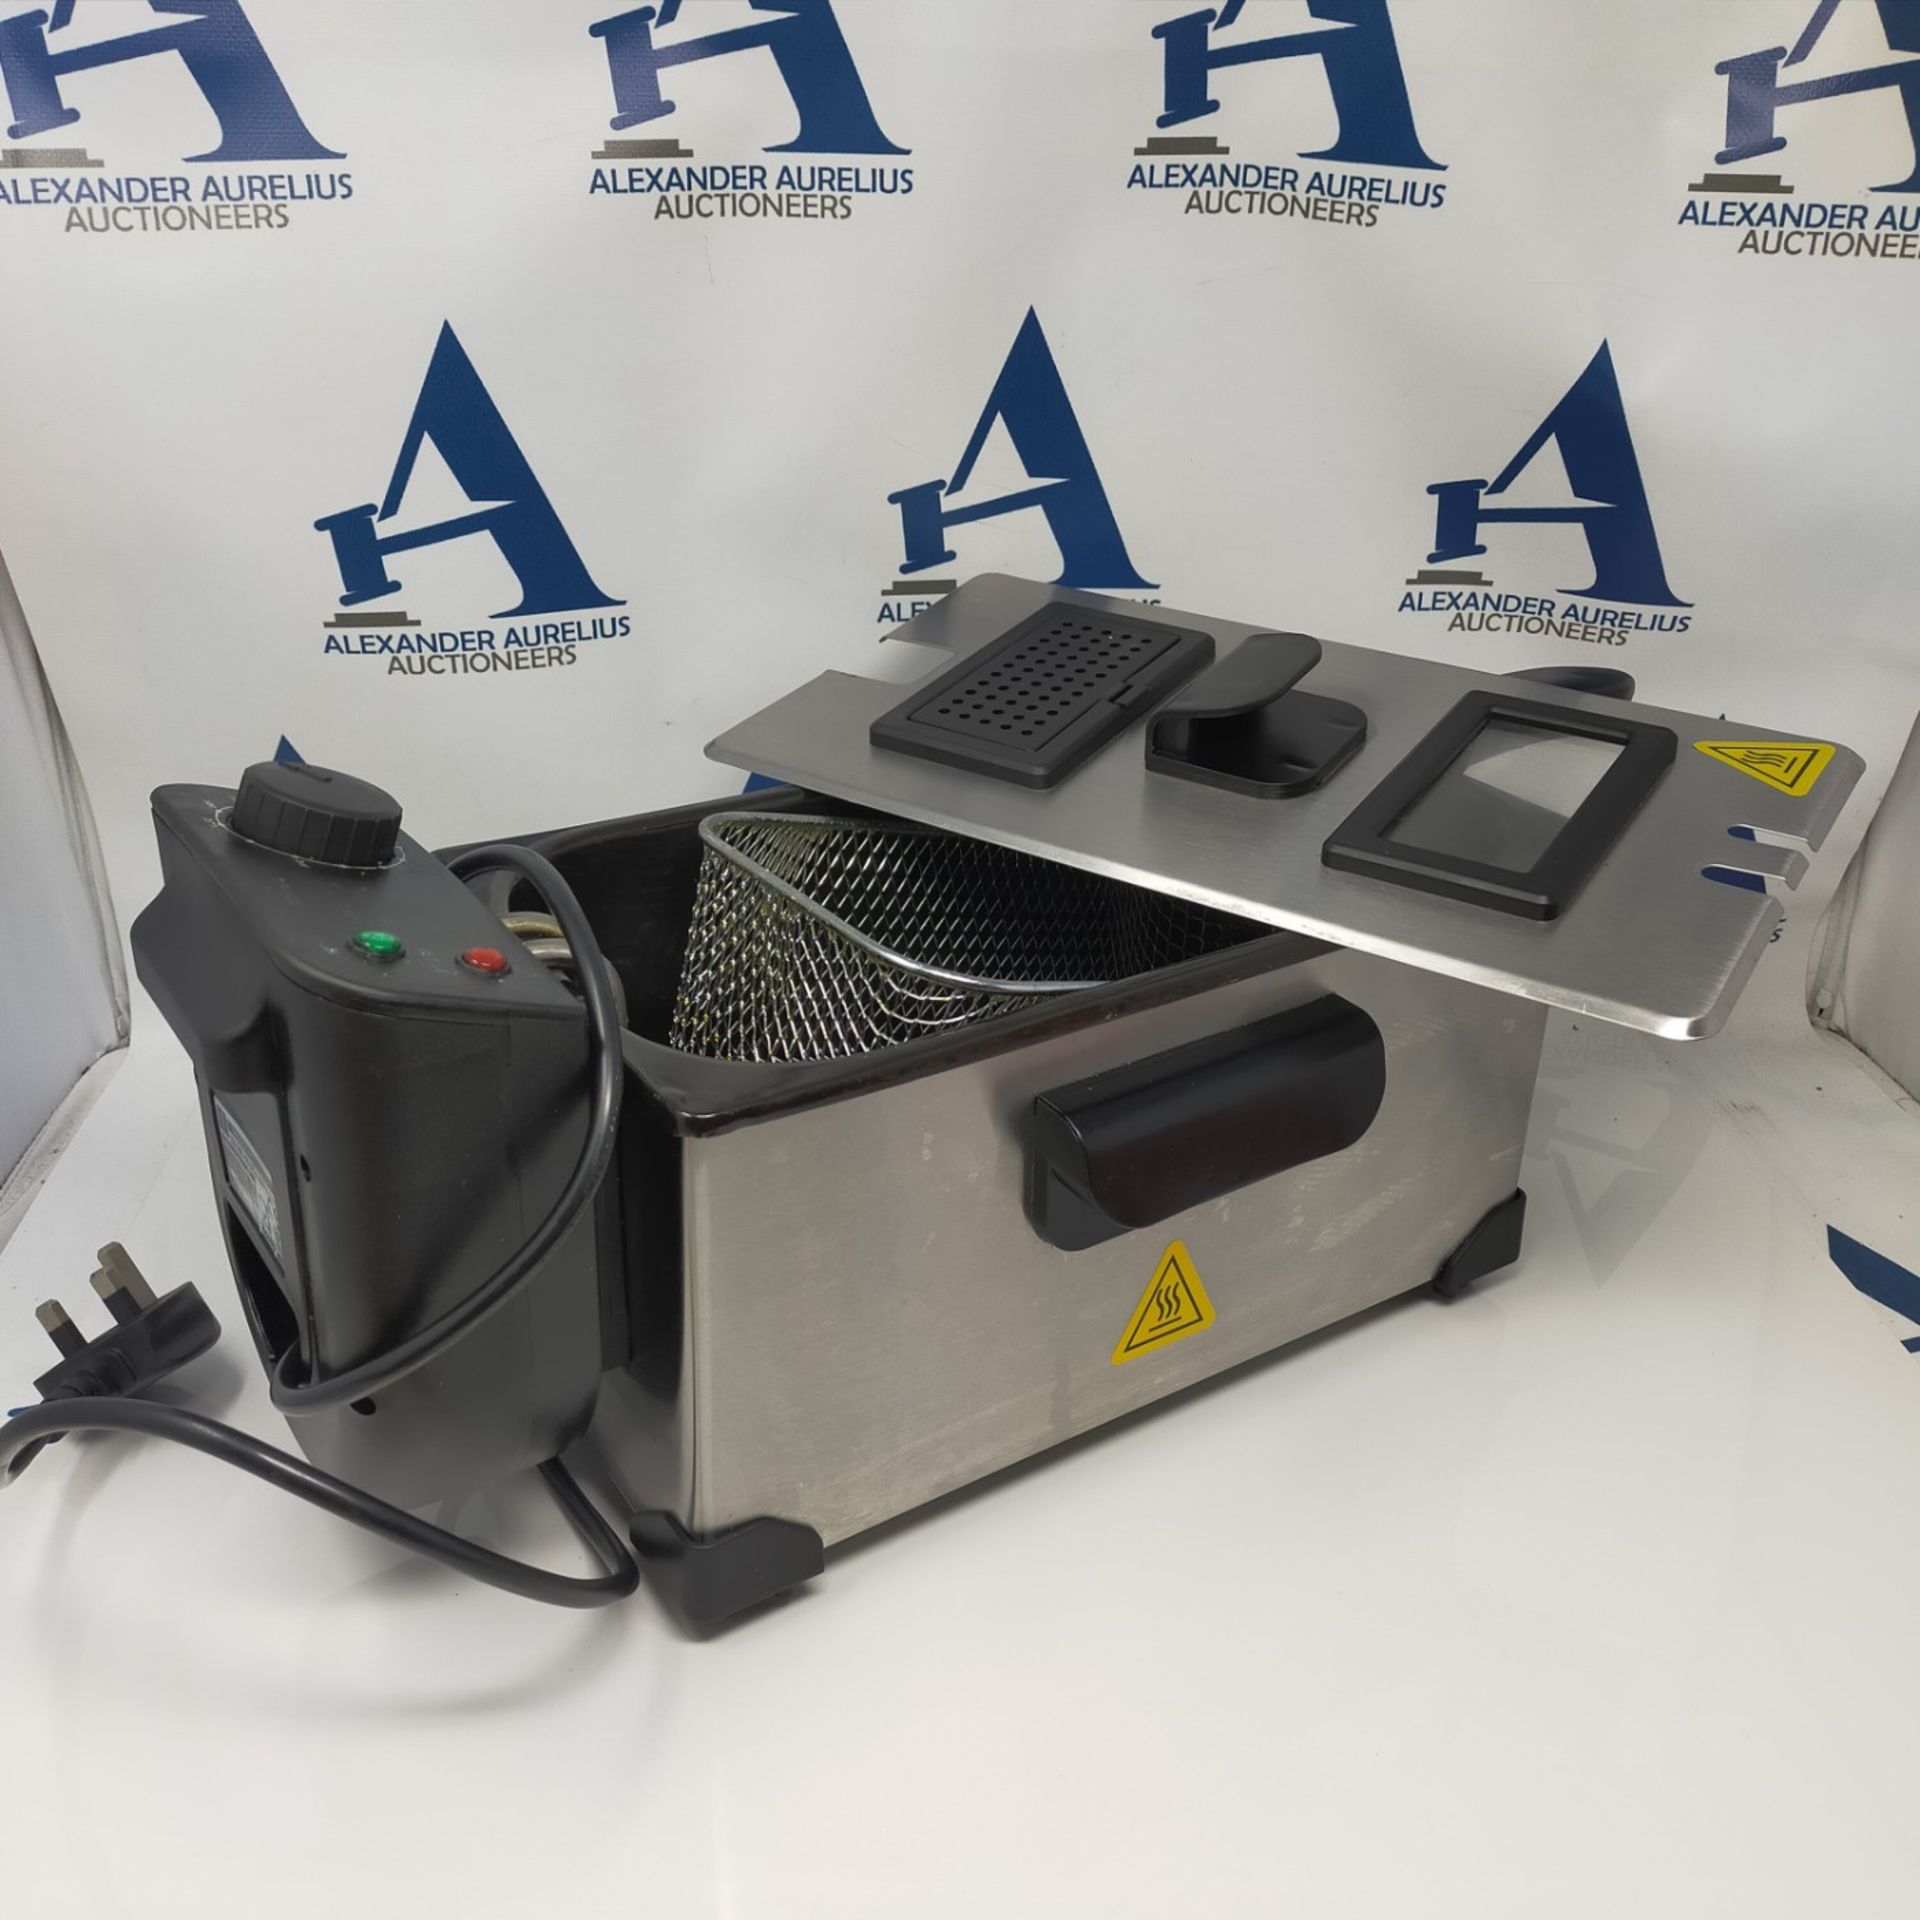 Aigostar Deep Fryer 2200W, 3L, 304 Food Grade Stainless Steel, Temperature Control, Re - Image 2 of 3